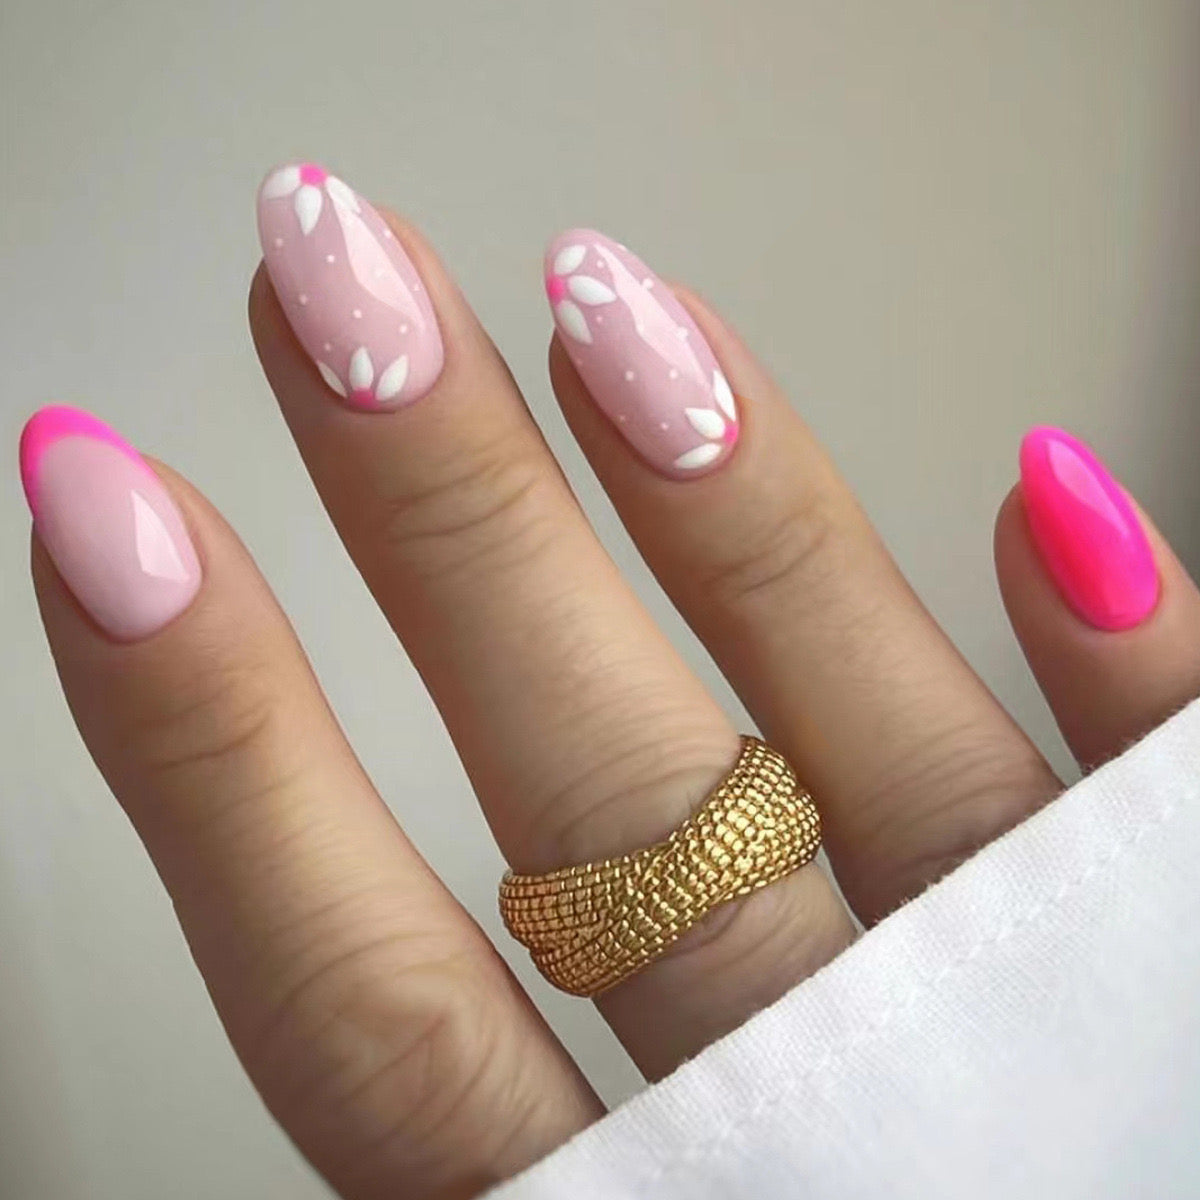 Hot Island Pink Medium Oval Pink Floral Press On Nails